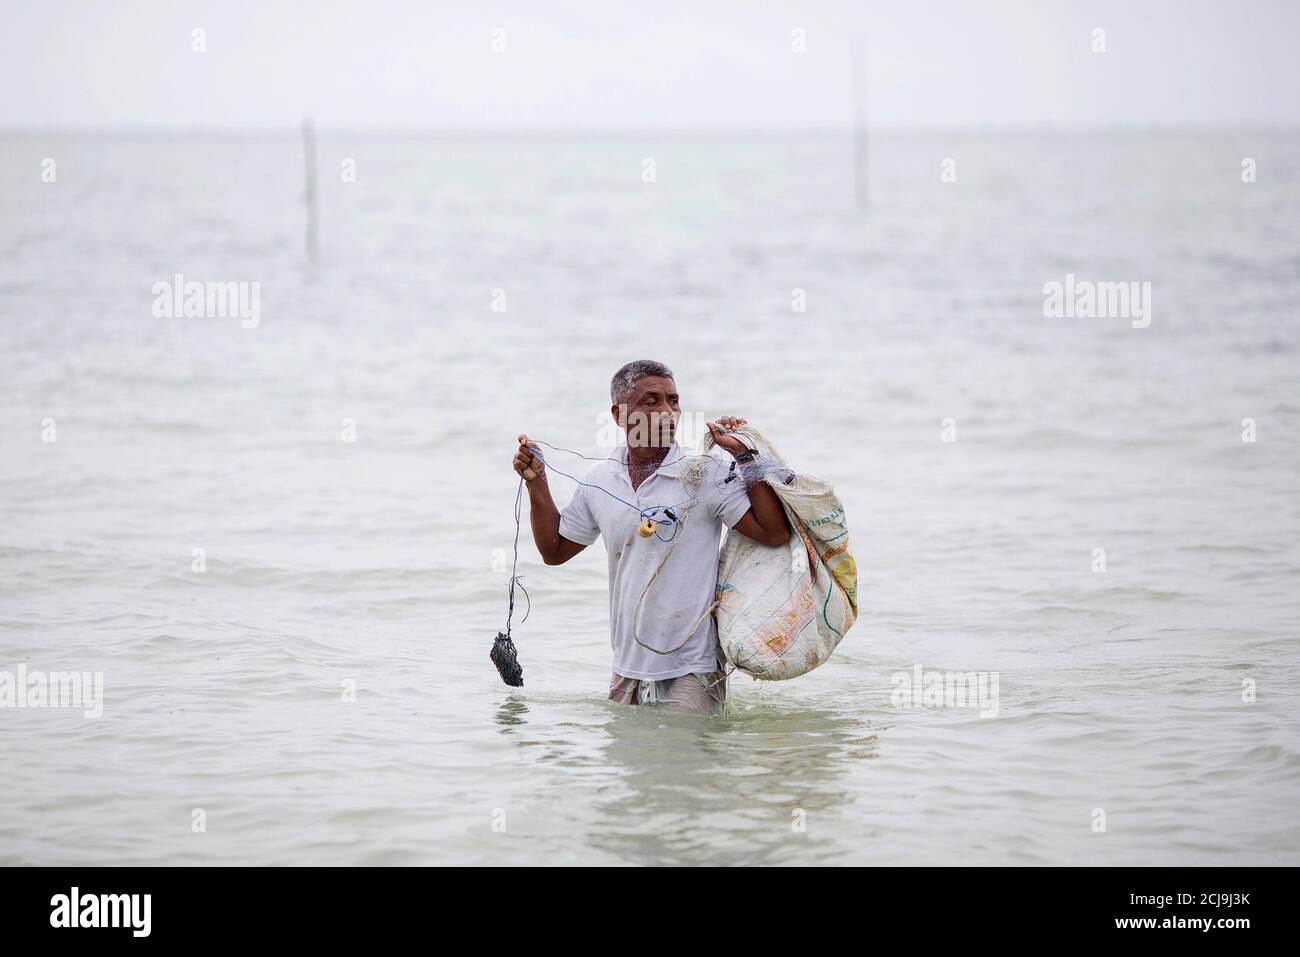 Hong Klathalay walks towards his fishing boat in Khao Lak, Phang Nga province December 14, 2014. Hong Klathalay, a 48-year-old community leader in the ethnic Moklen village of Thung Wa in Phang Nga province, said the tsunami put an abrupt stop to tourism development, granting them unfettered access to the sea and time to resume their traditional way of life. With tourism making a comeback in the area, the Moklens fear their way of life on the coast, with the sea, is on the brink of extinction. Picture taken  December 14, 2014.  REUTERS/Damir Sagolj (THAILAND - Tags: SOCIETY BUSINESS AGRICULTUR Stock Photo